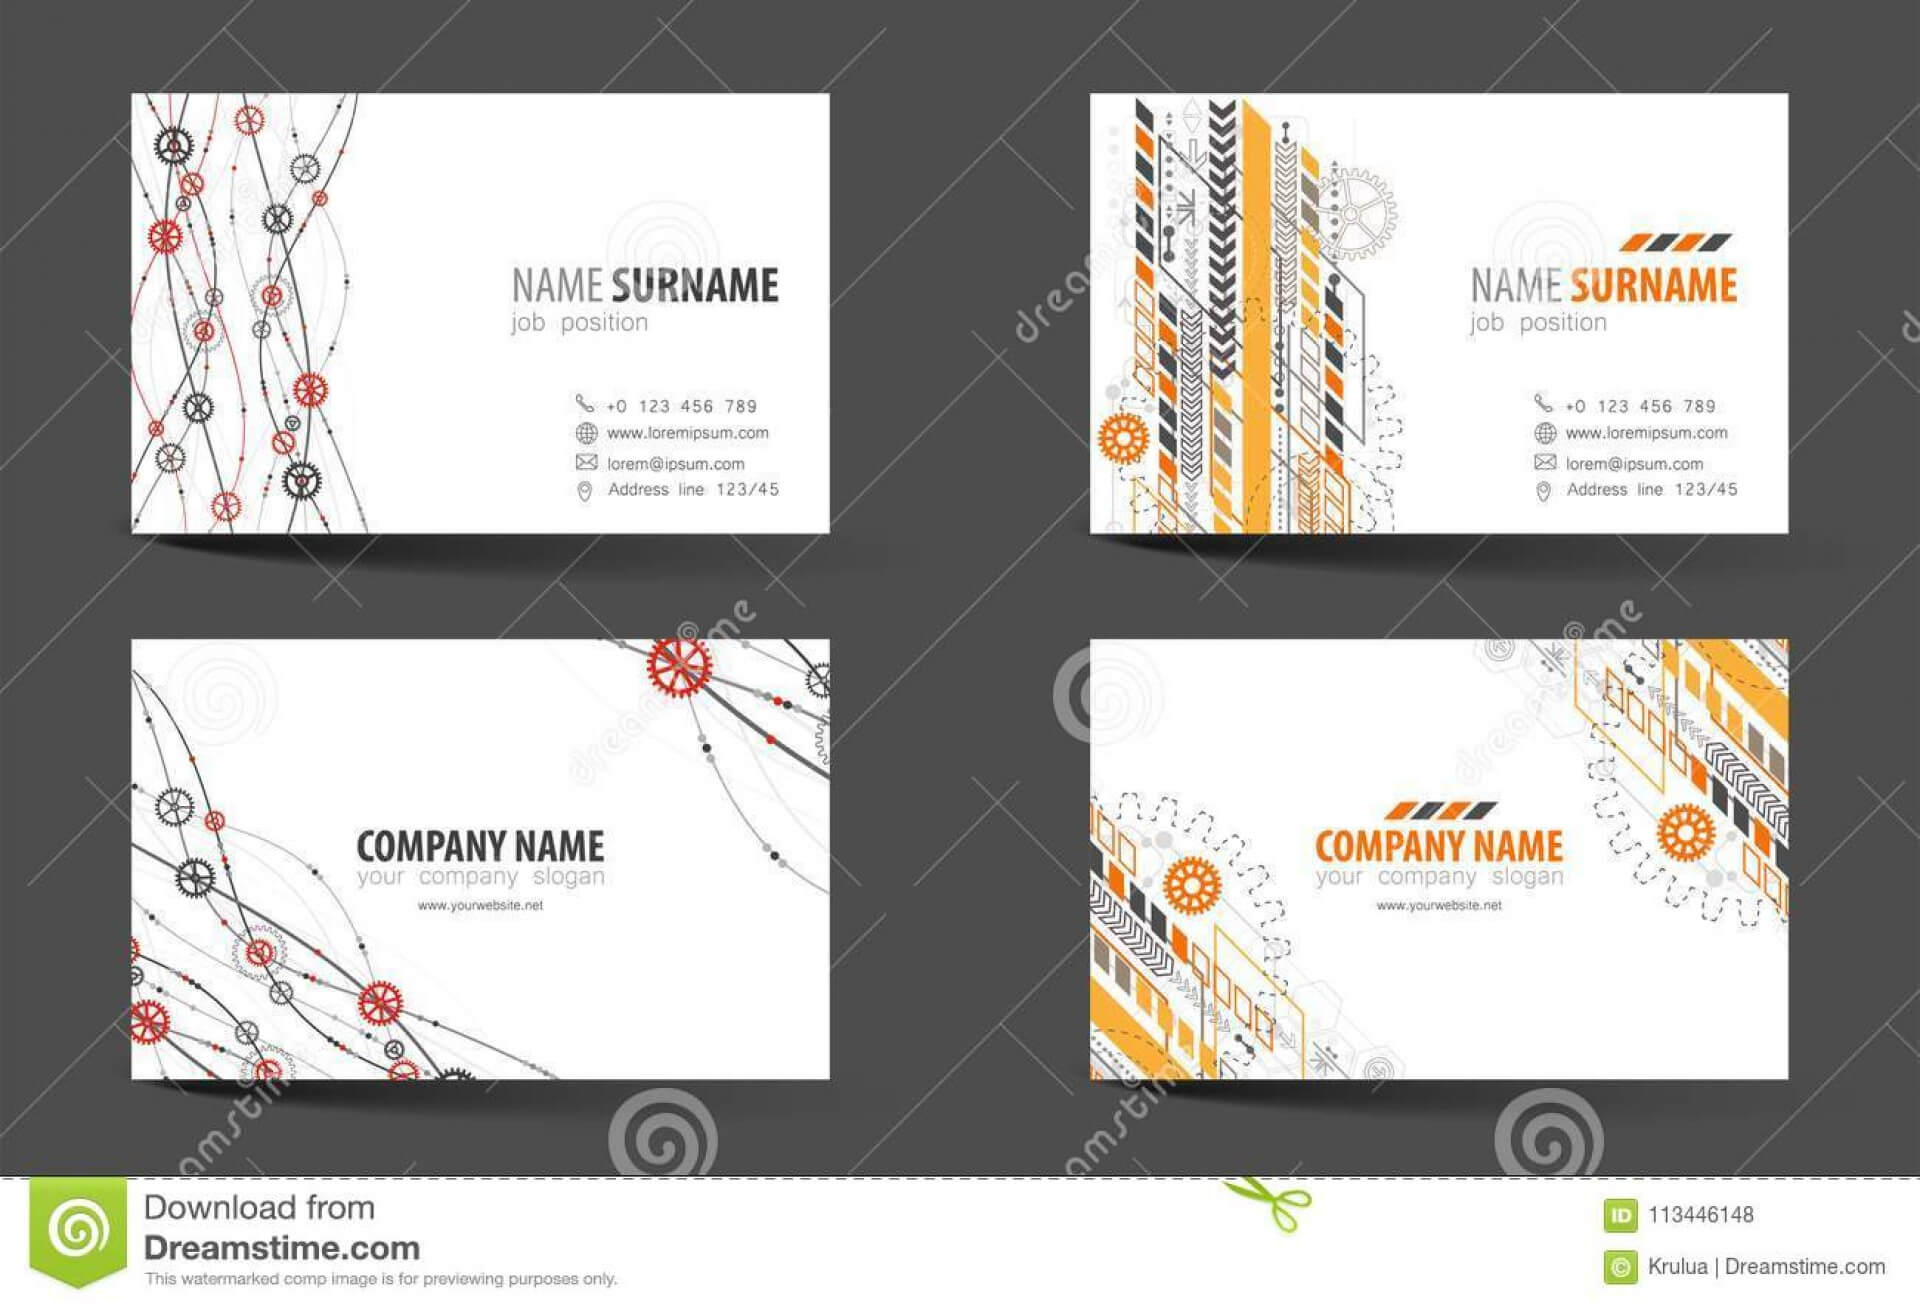 015 Double Sided Business Card Template Illustrator Best Of Throughout Double Sided Business Card Template Illustrator